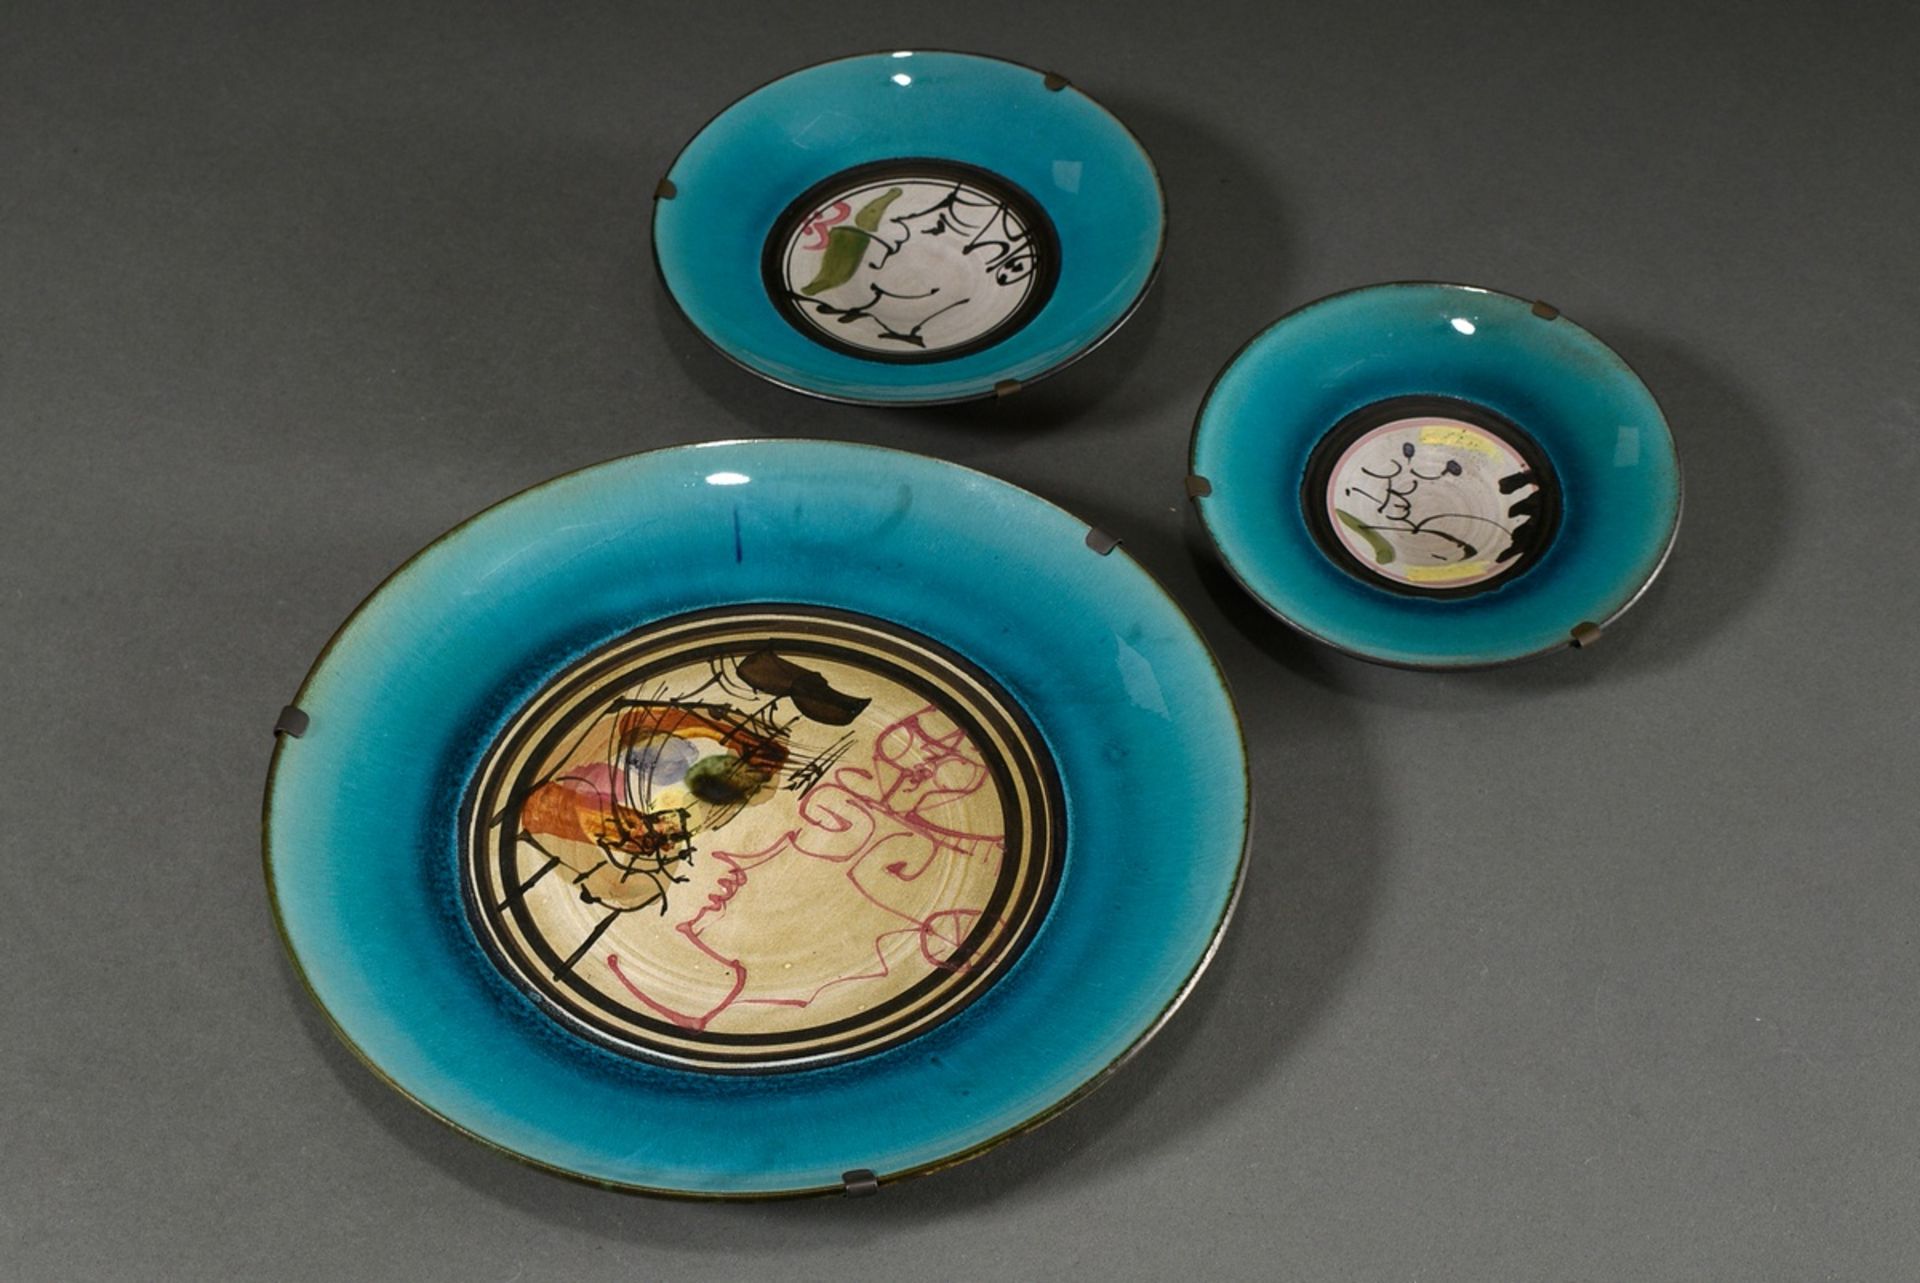 3 Various pieces of studio pottery by Gilbert Portanier, Vallauris: 2 small bowls and 1 plate, turq - Image 2 of 6